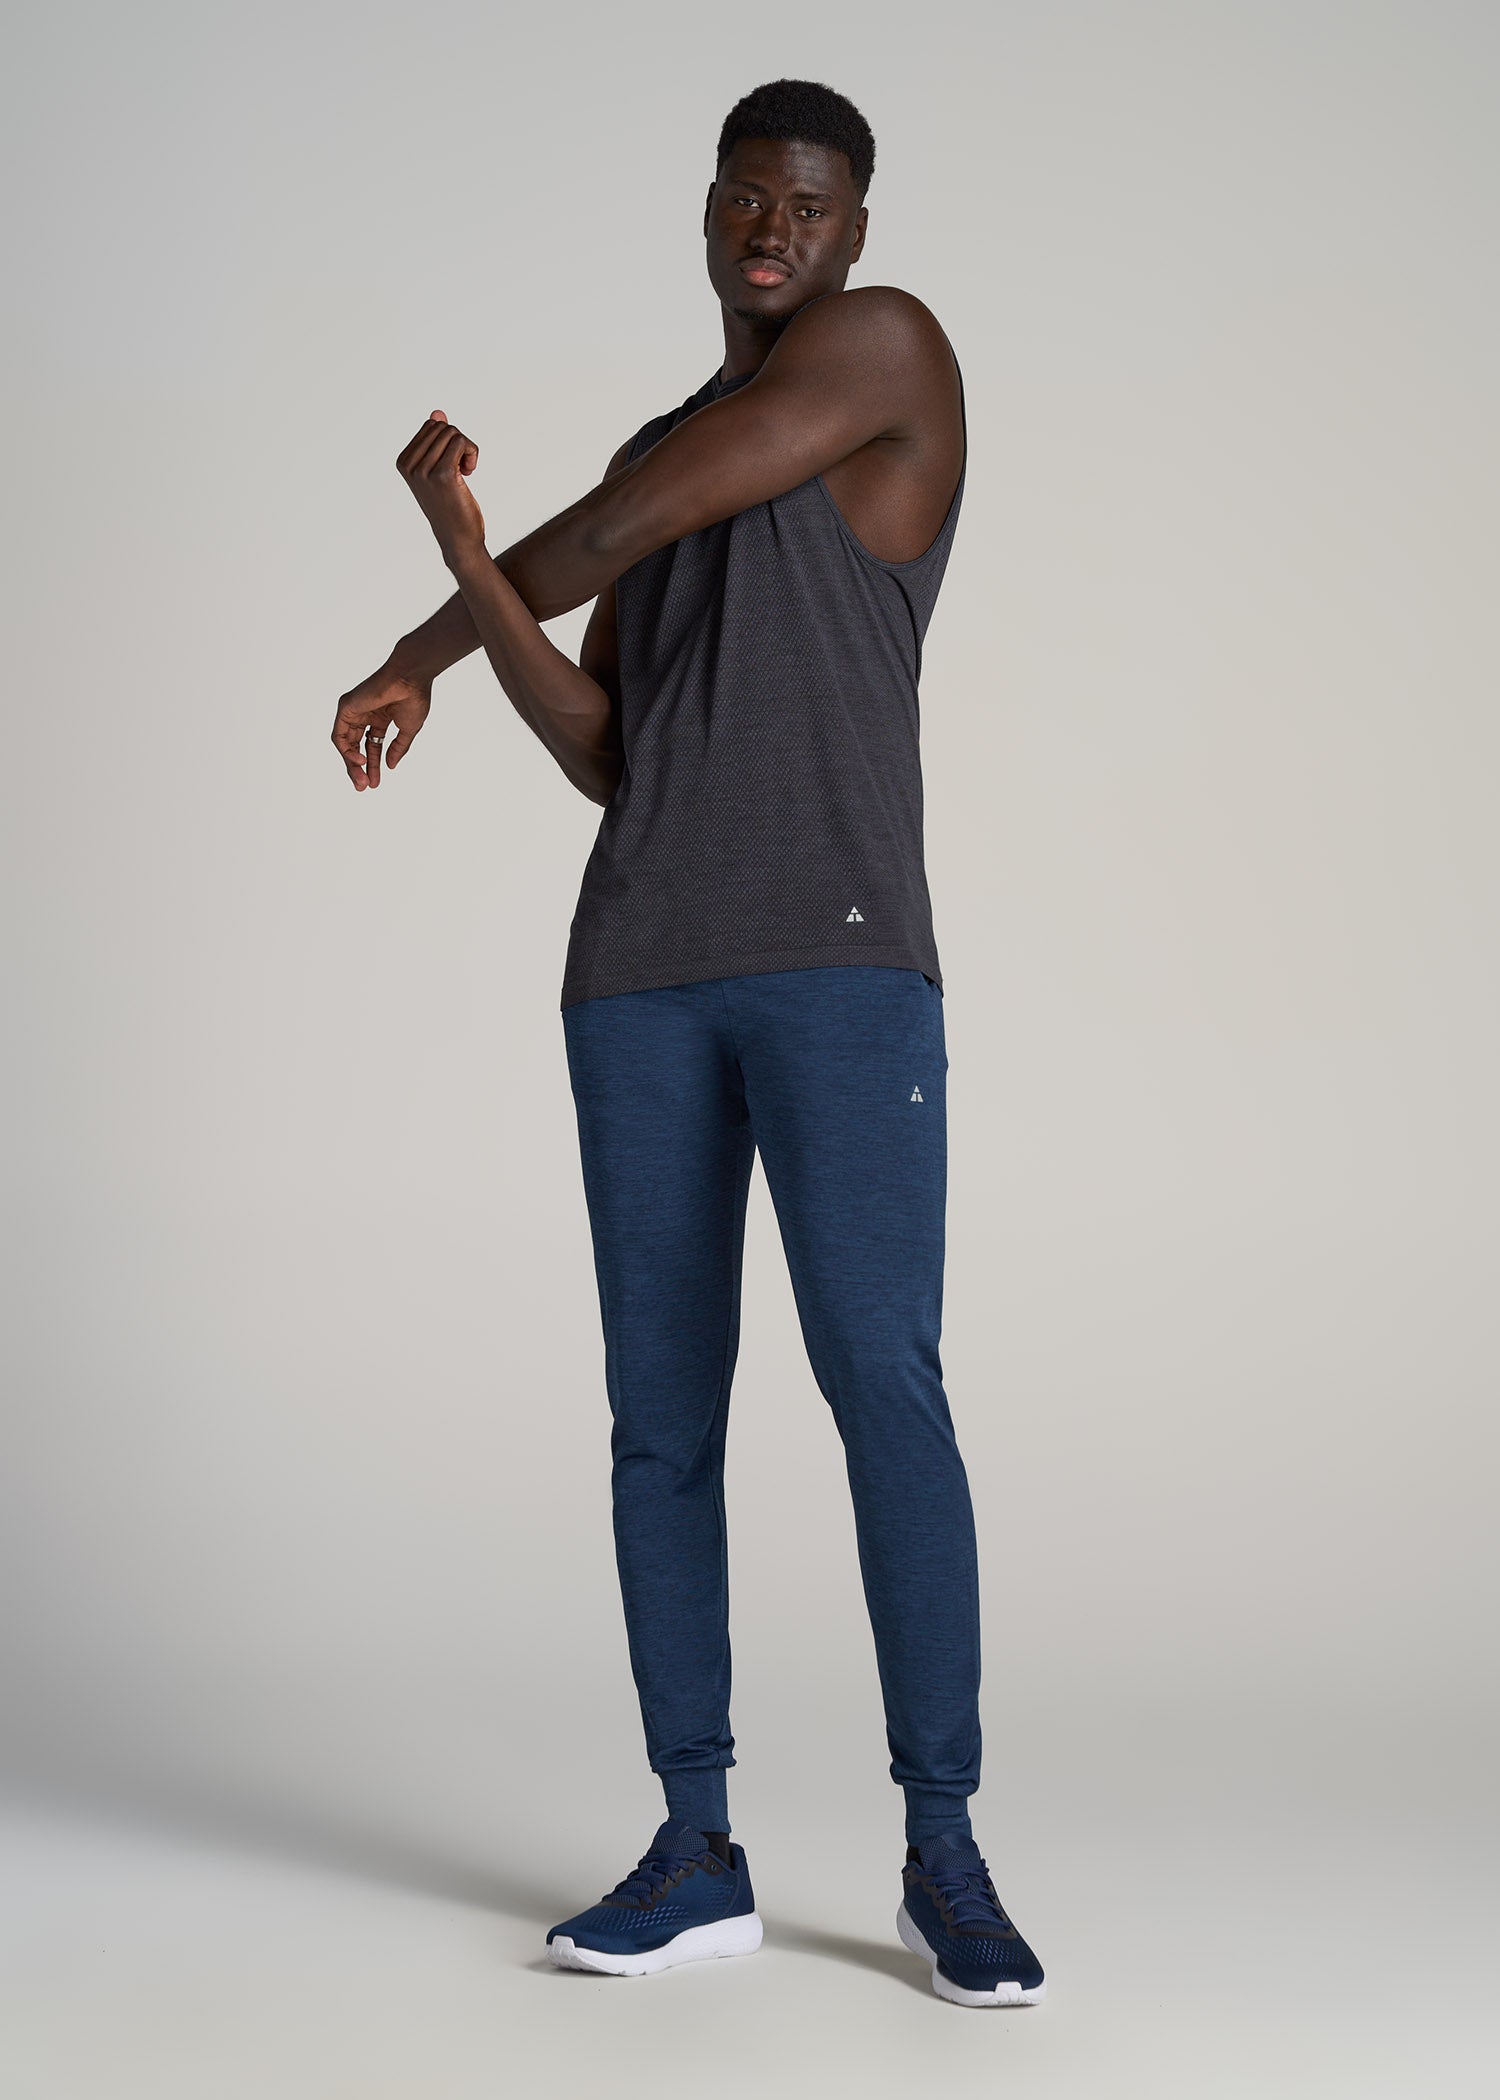 A.T. Performance Engineered Joggers for Tall Men in Navy Mix